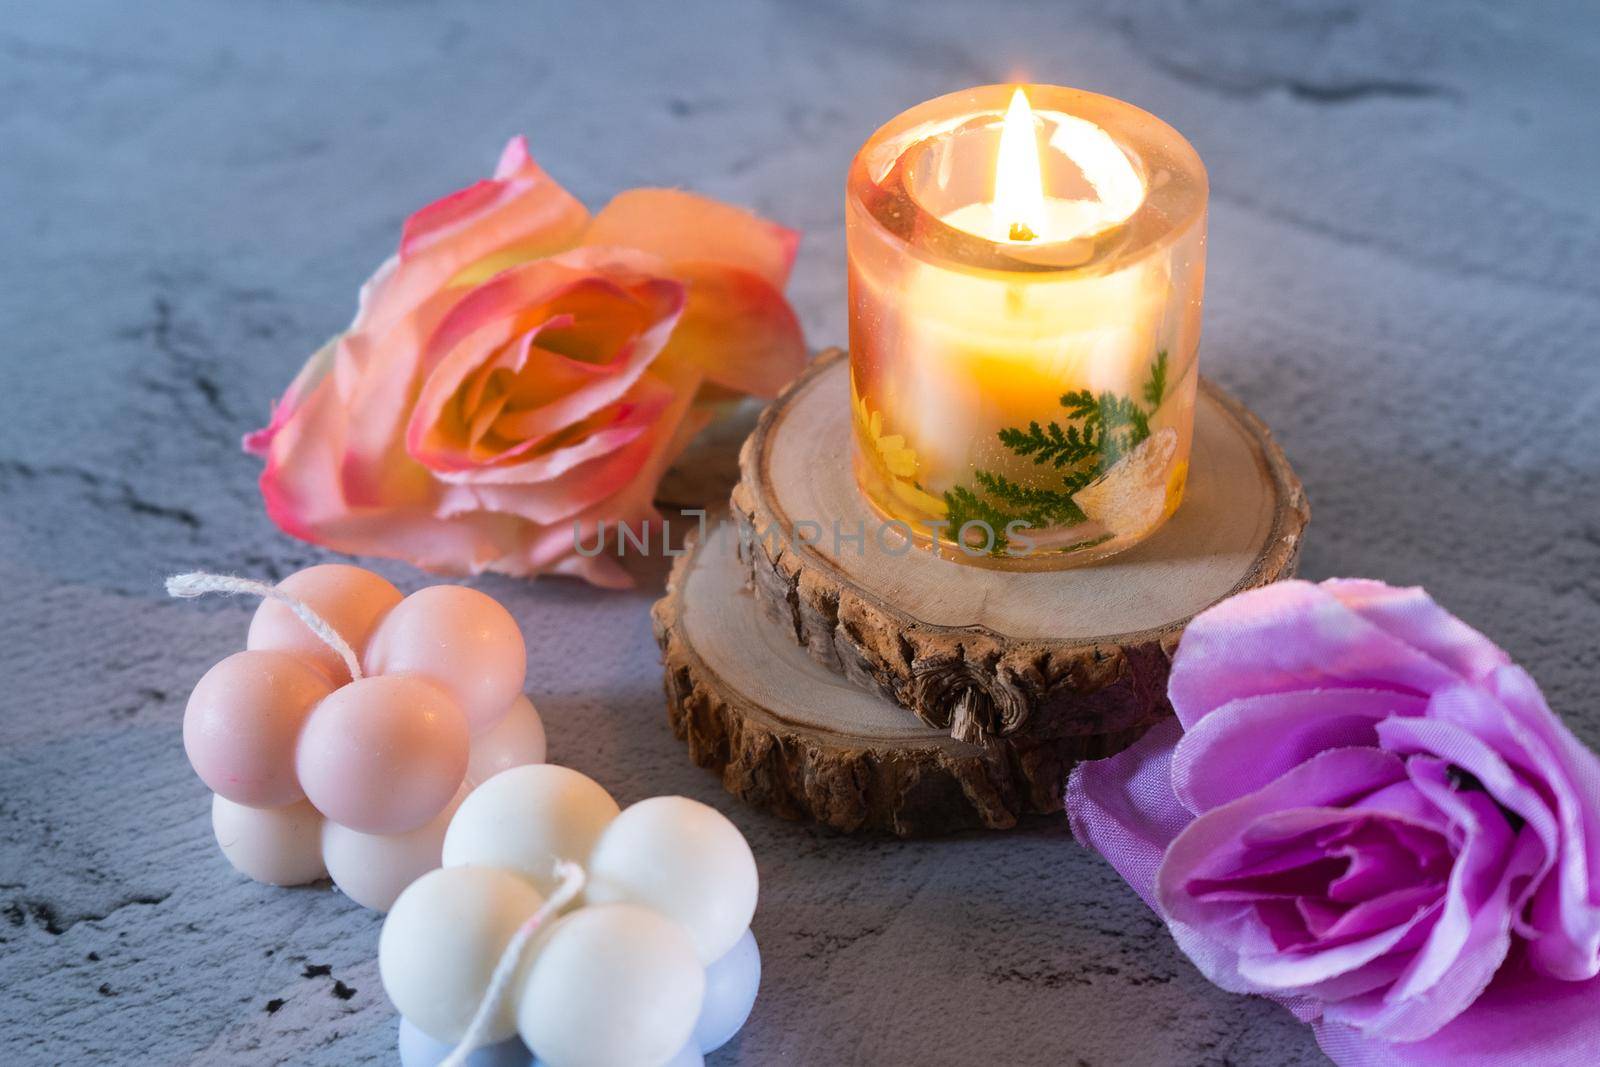 Lit resin art transparent candle on wood coaster with flowers showing the decoration of diwali, christmas, new year shot in pastel shades